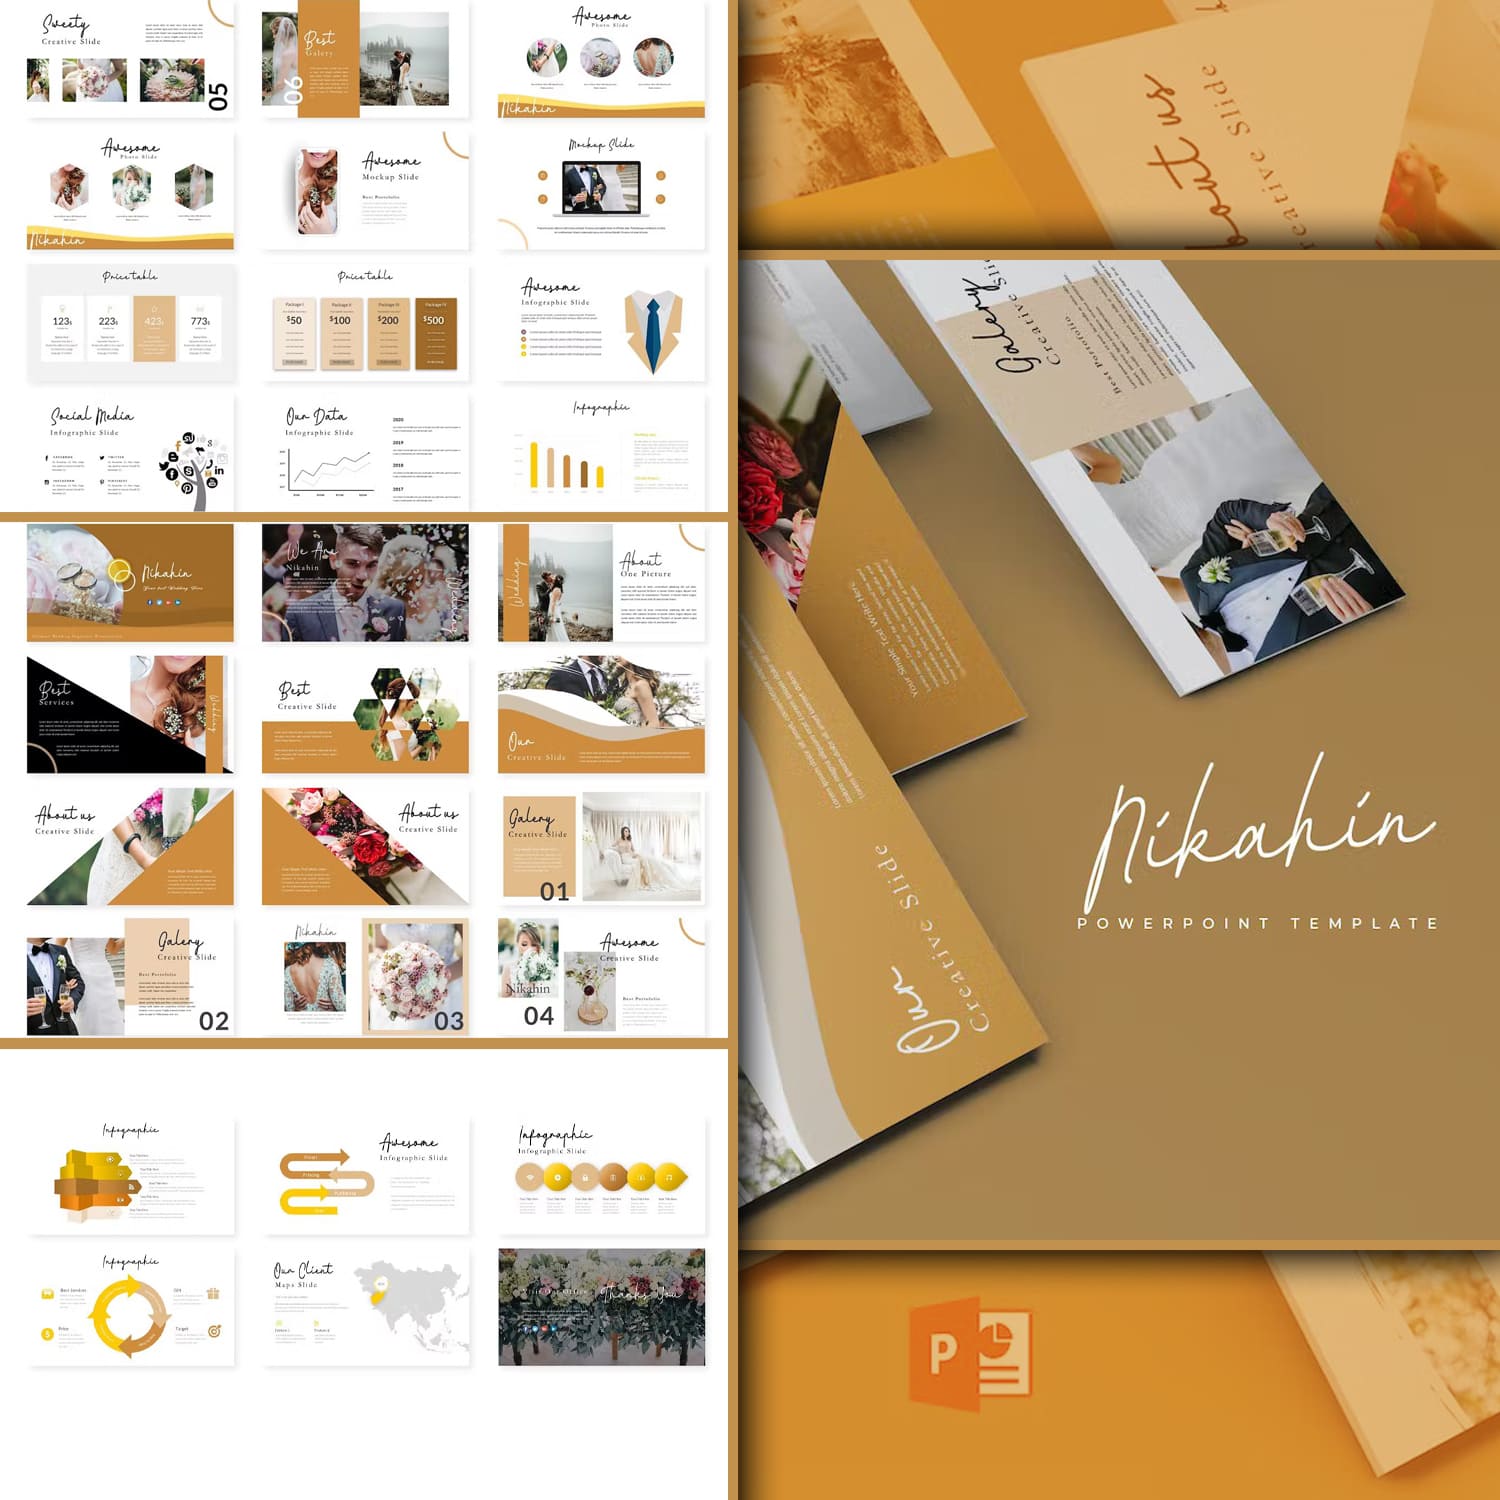 A selection of images of colorful presentation template slides in brown and white colors.